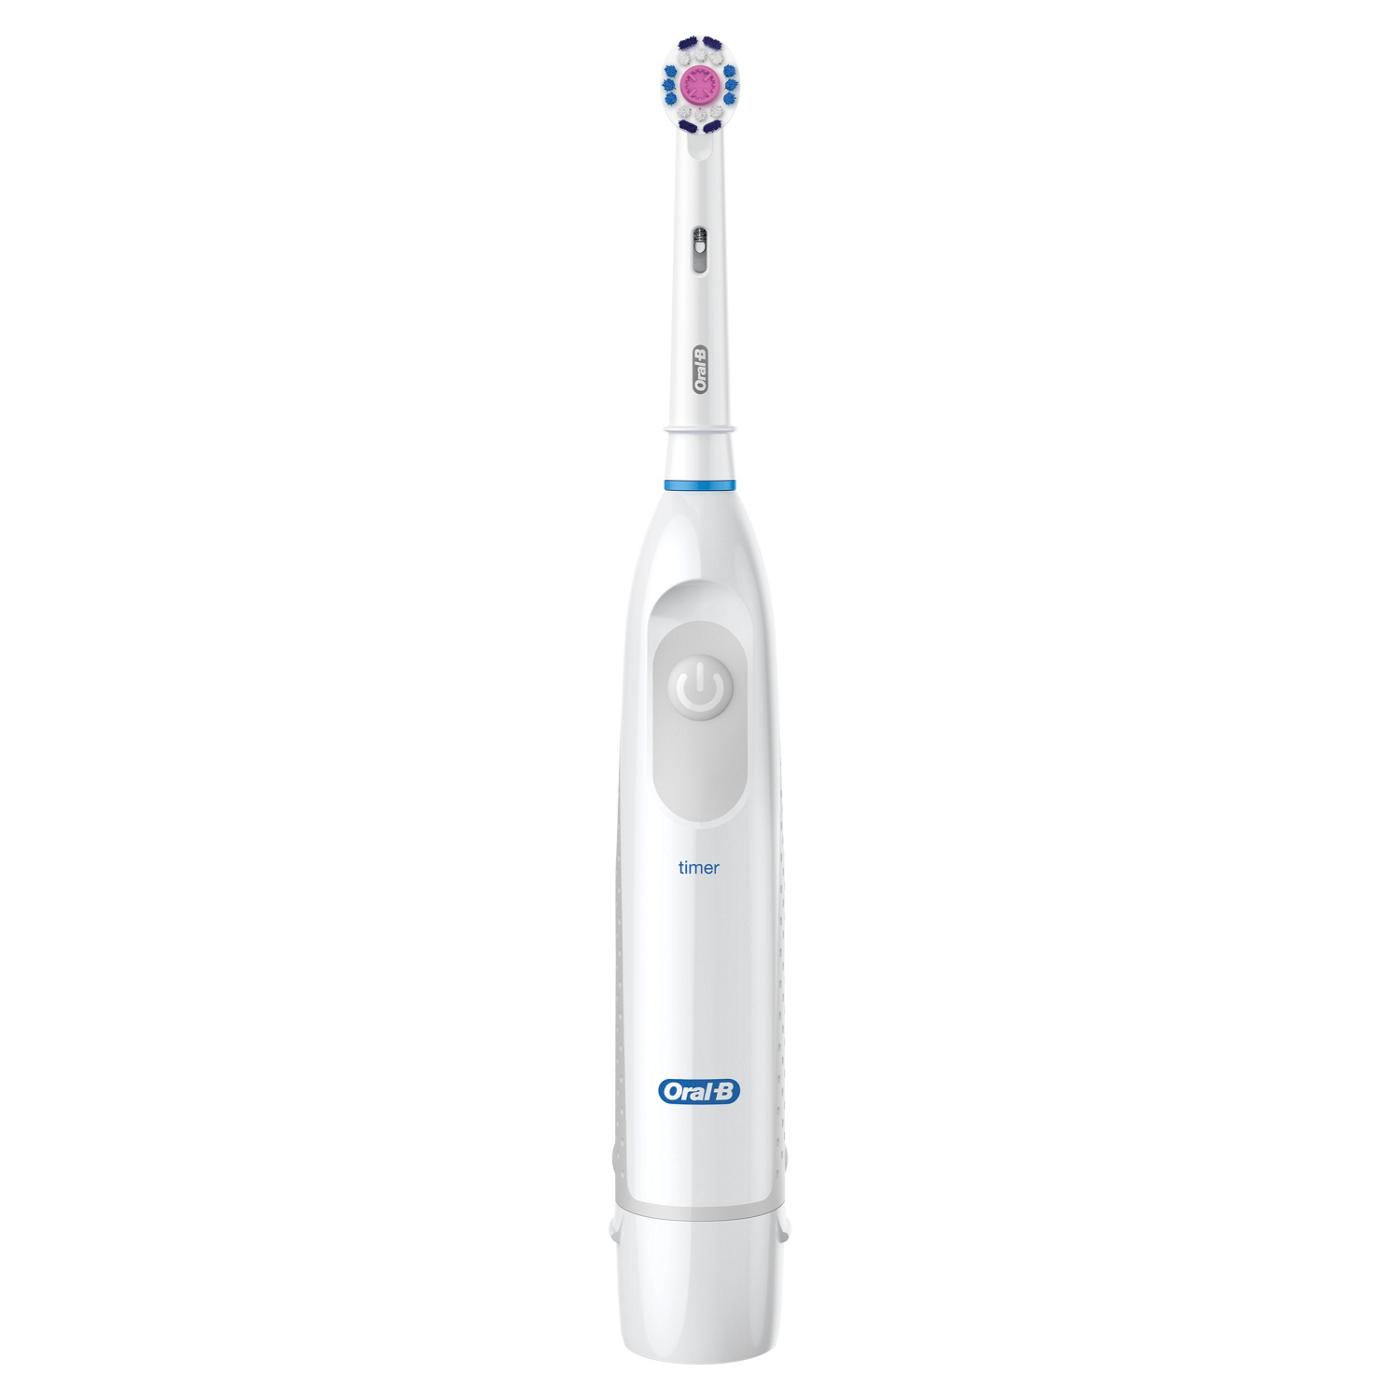 Oral-B 3D White Brilliance Whitening Battery Toothbrush; image 7 of 8